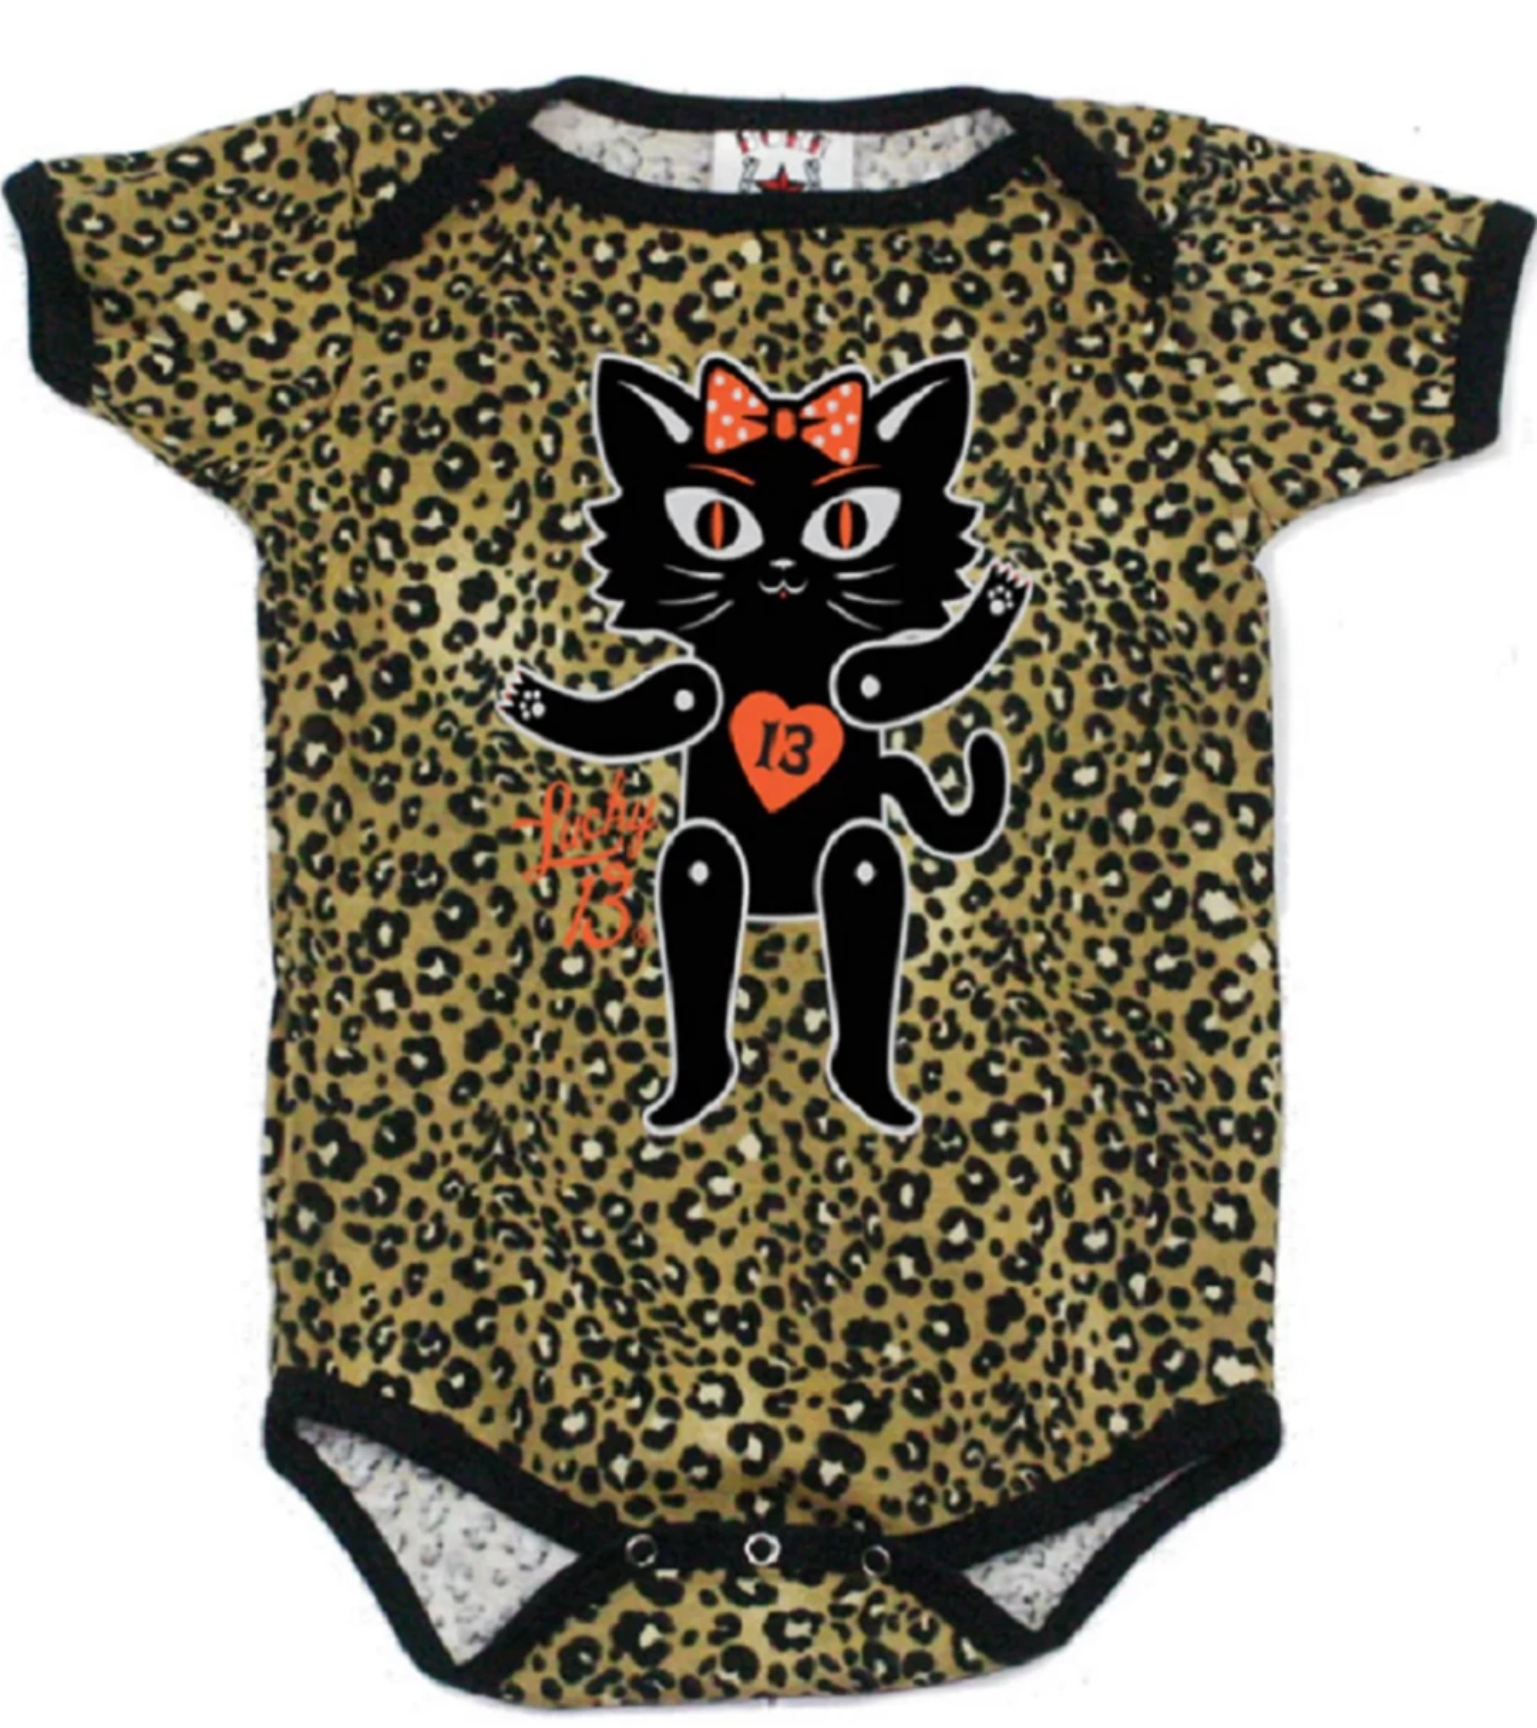 The KITTY DOLL Infant One-Piece Snapper